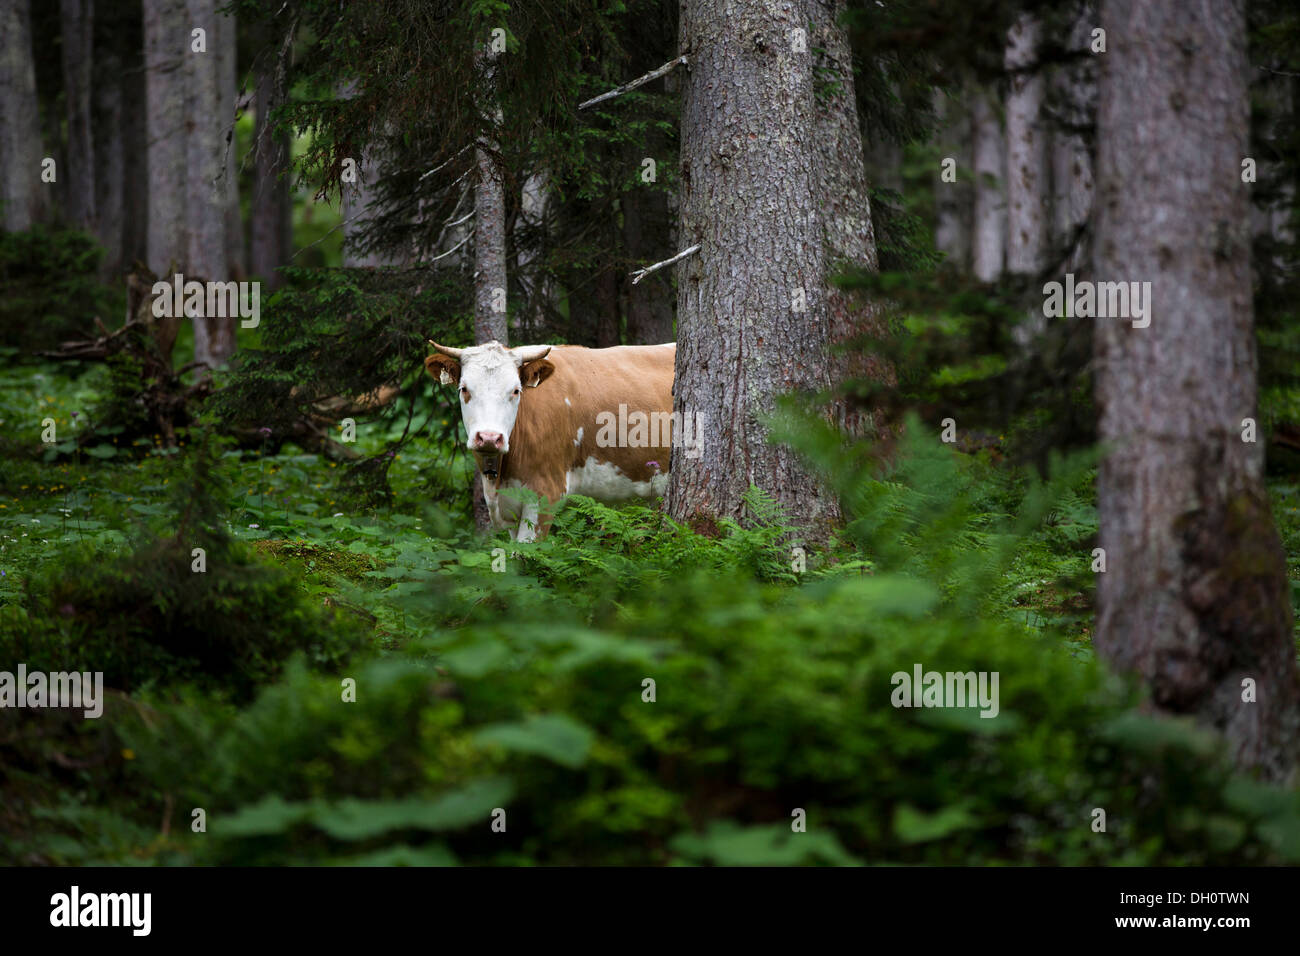 Cow in a forest, Ehrwald, Austria, Europe Stock Photo